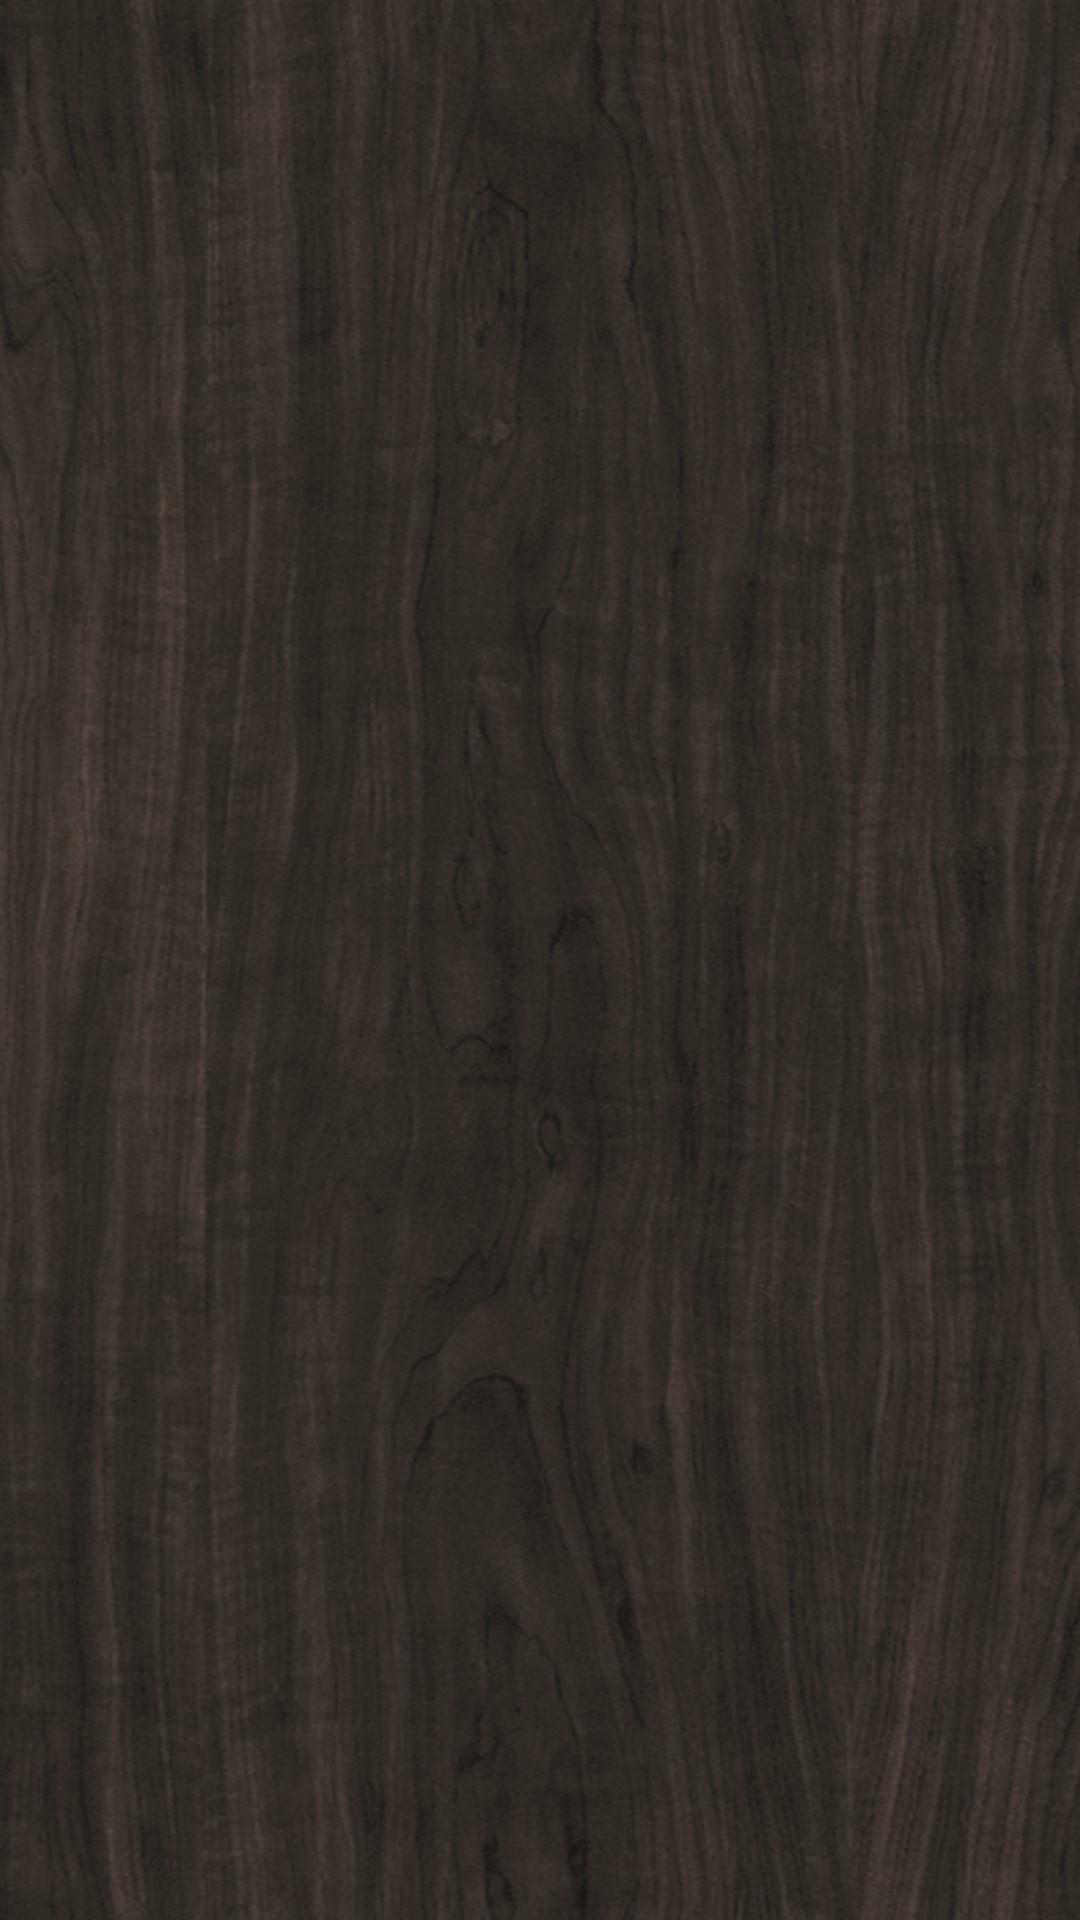 1080x1920 Compelling Wood Grain Wall Covering For Arrangement And Mural. best house  floor plans. mio ...